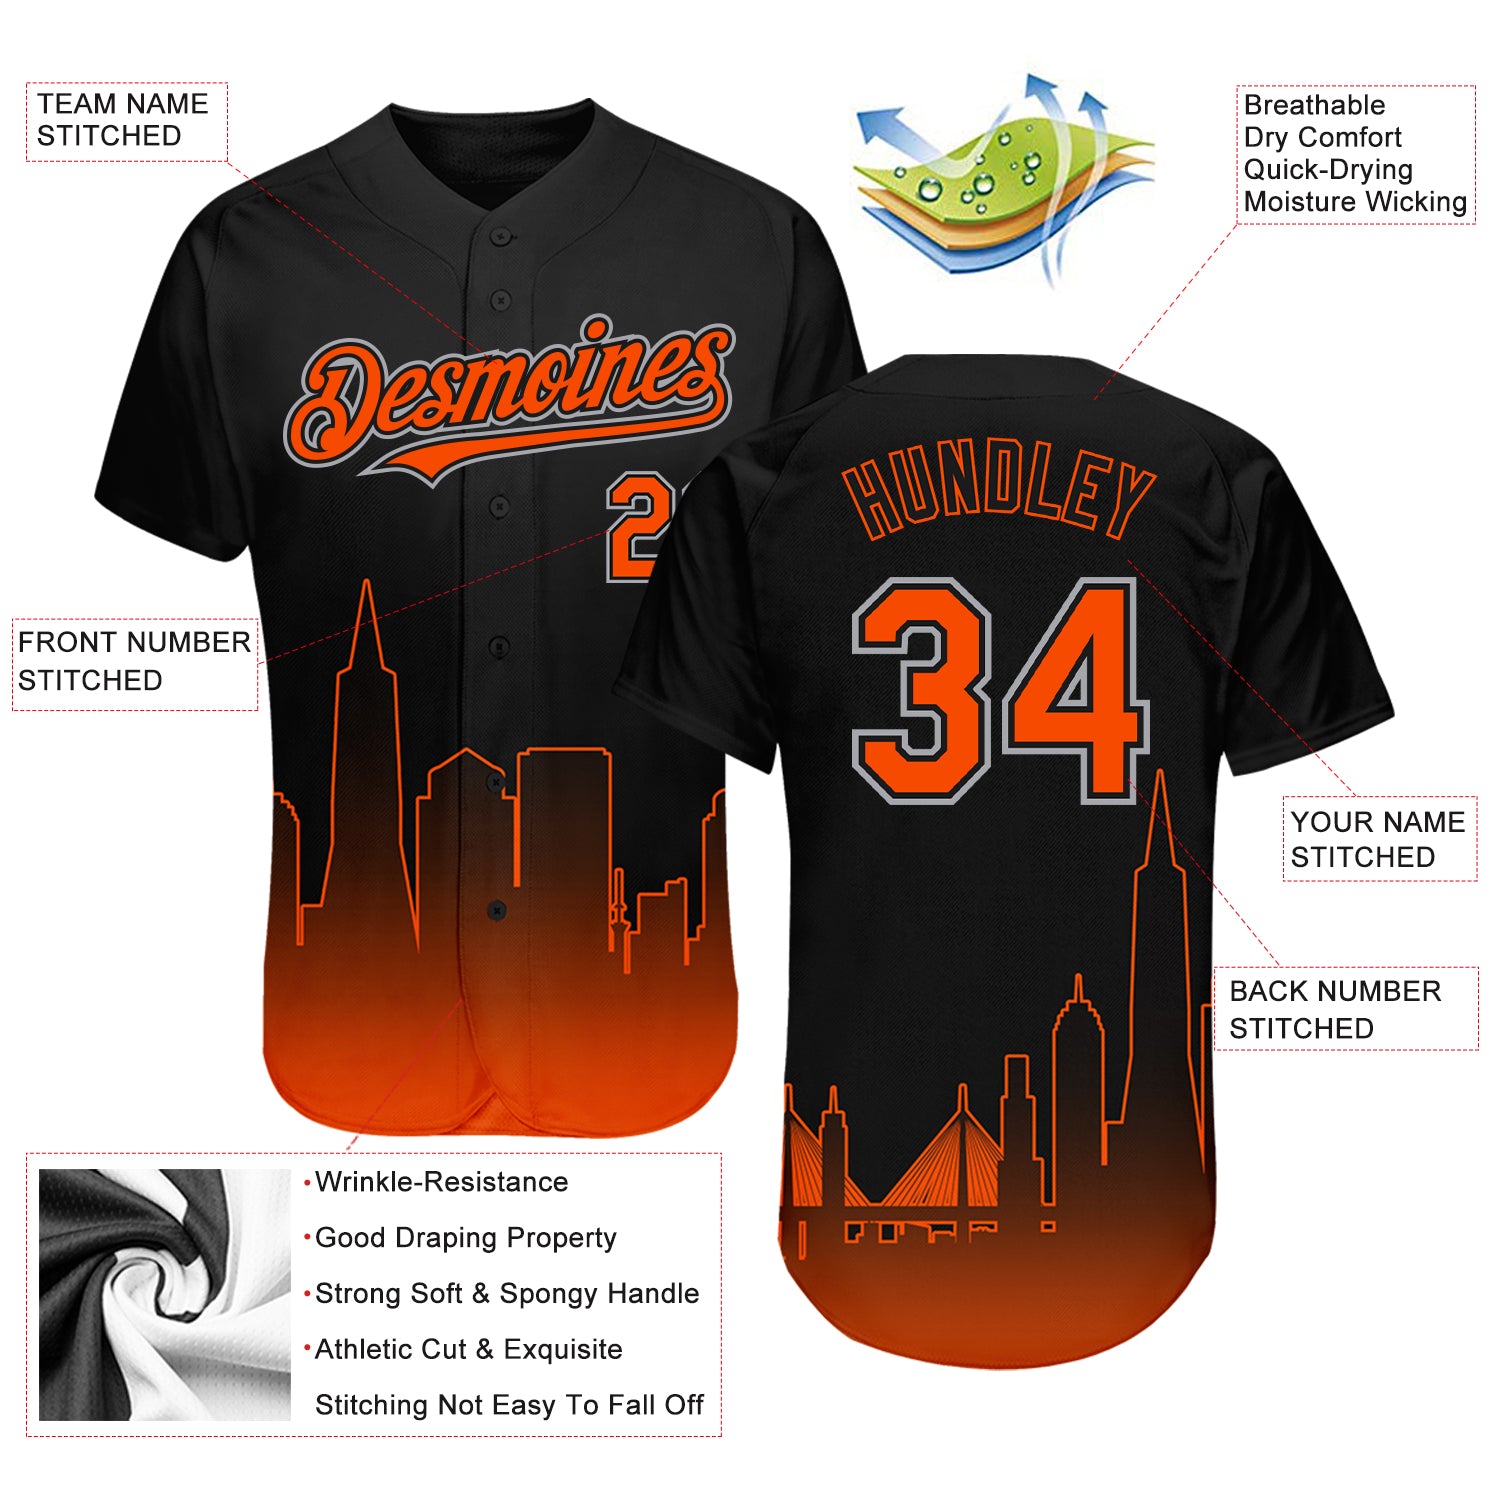 San Francisco Giants Blank Gray With Camo Jersey on sale,for Cheap